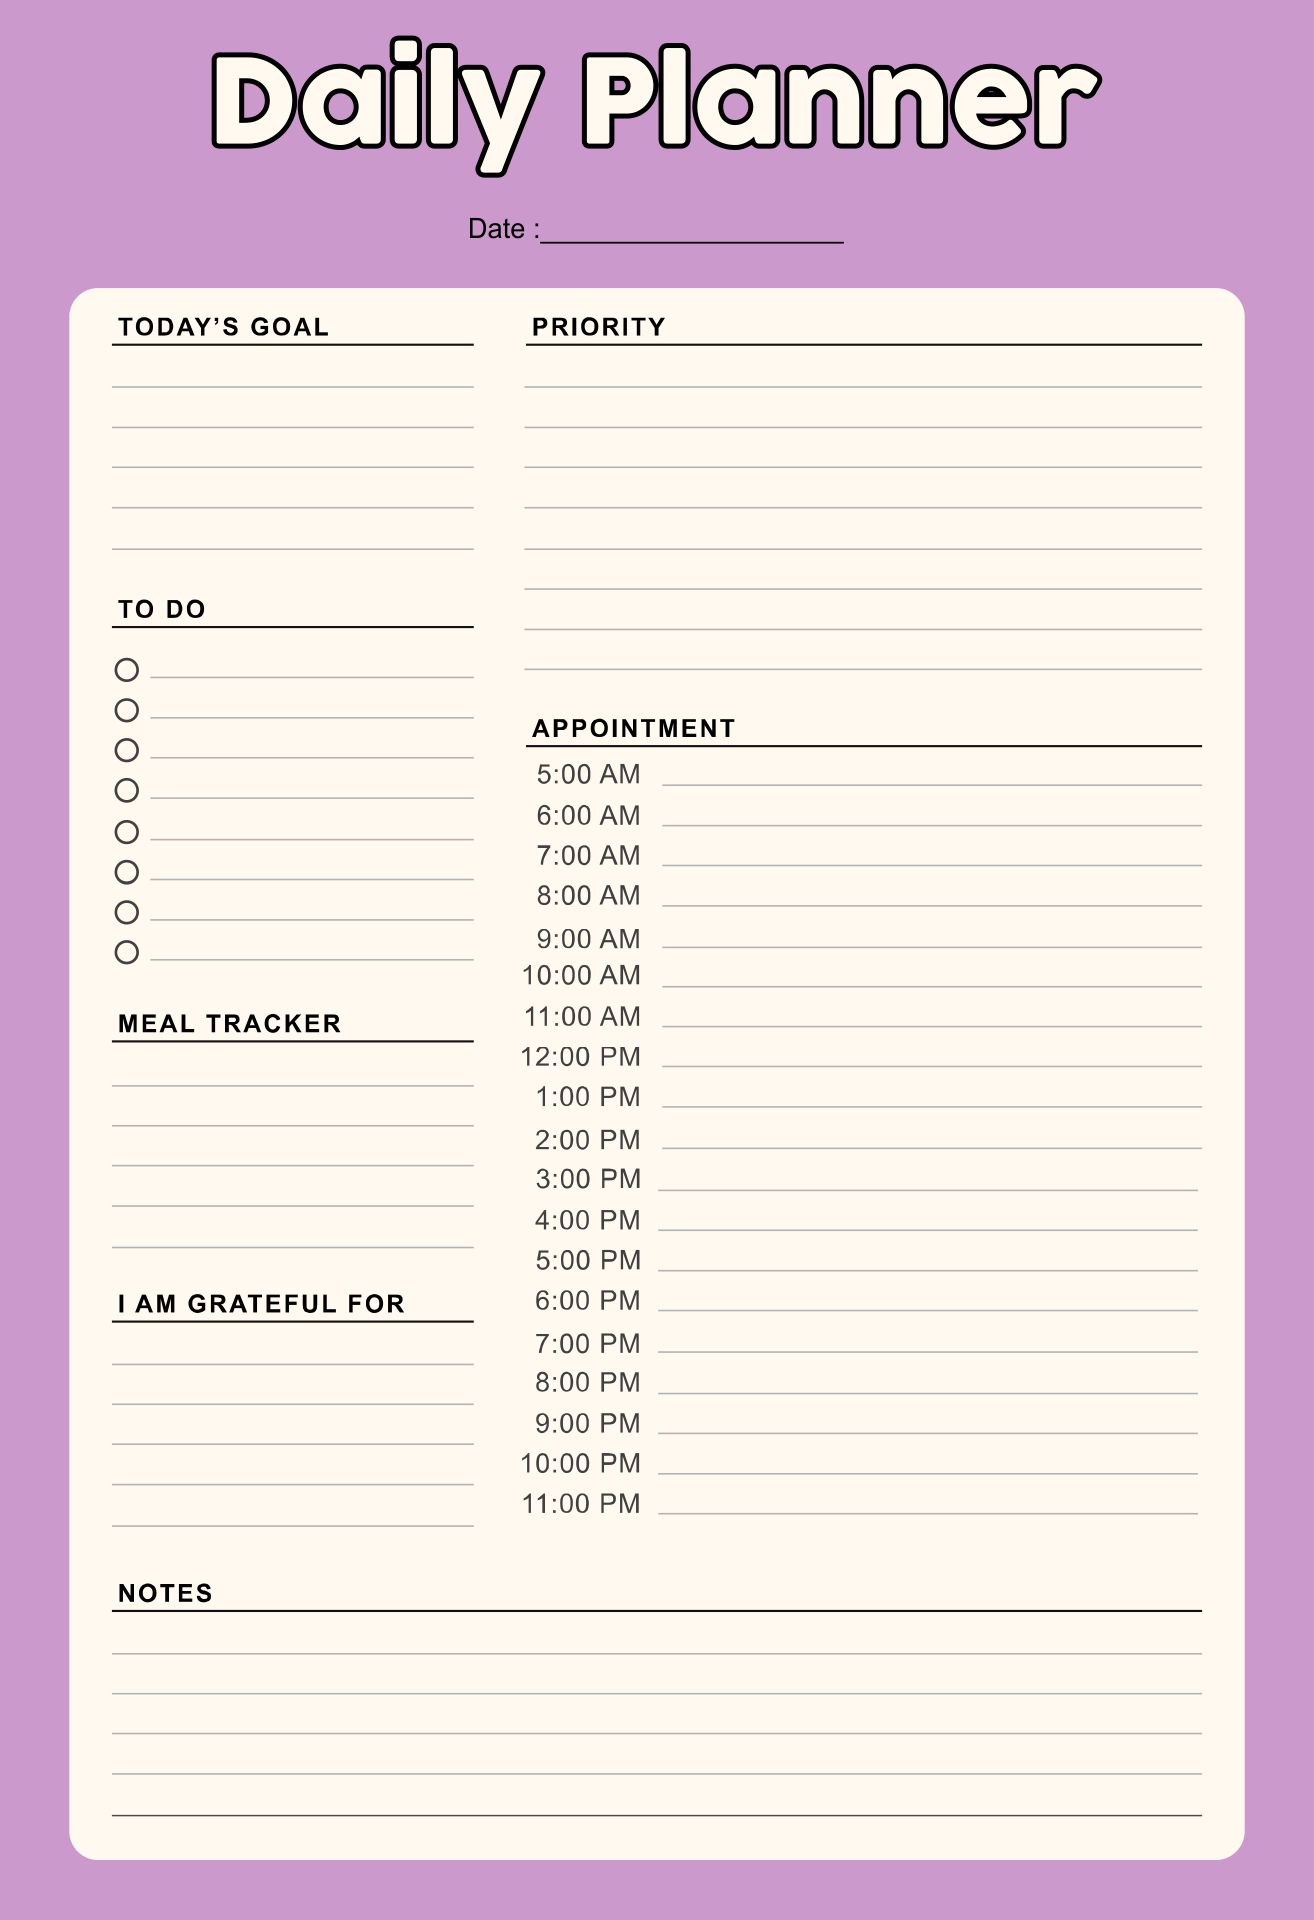 Free Printable Daily Planner With Times